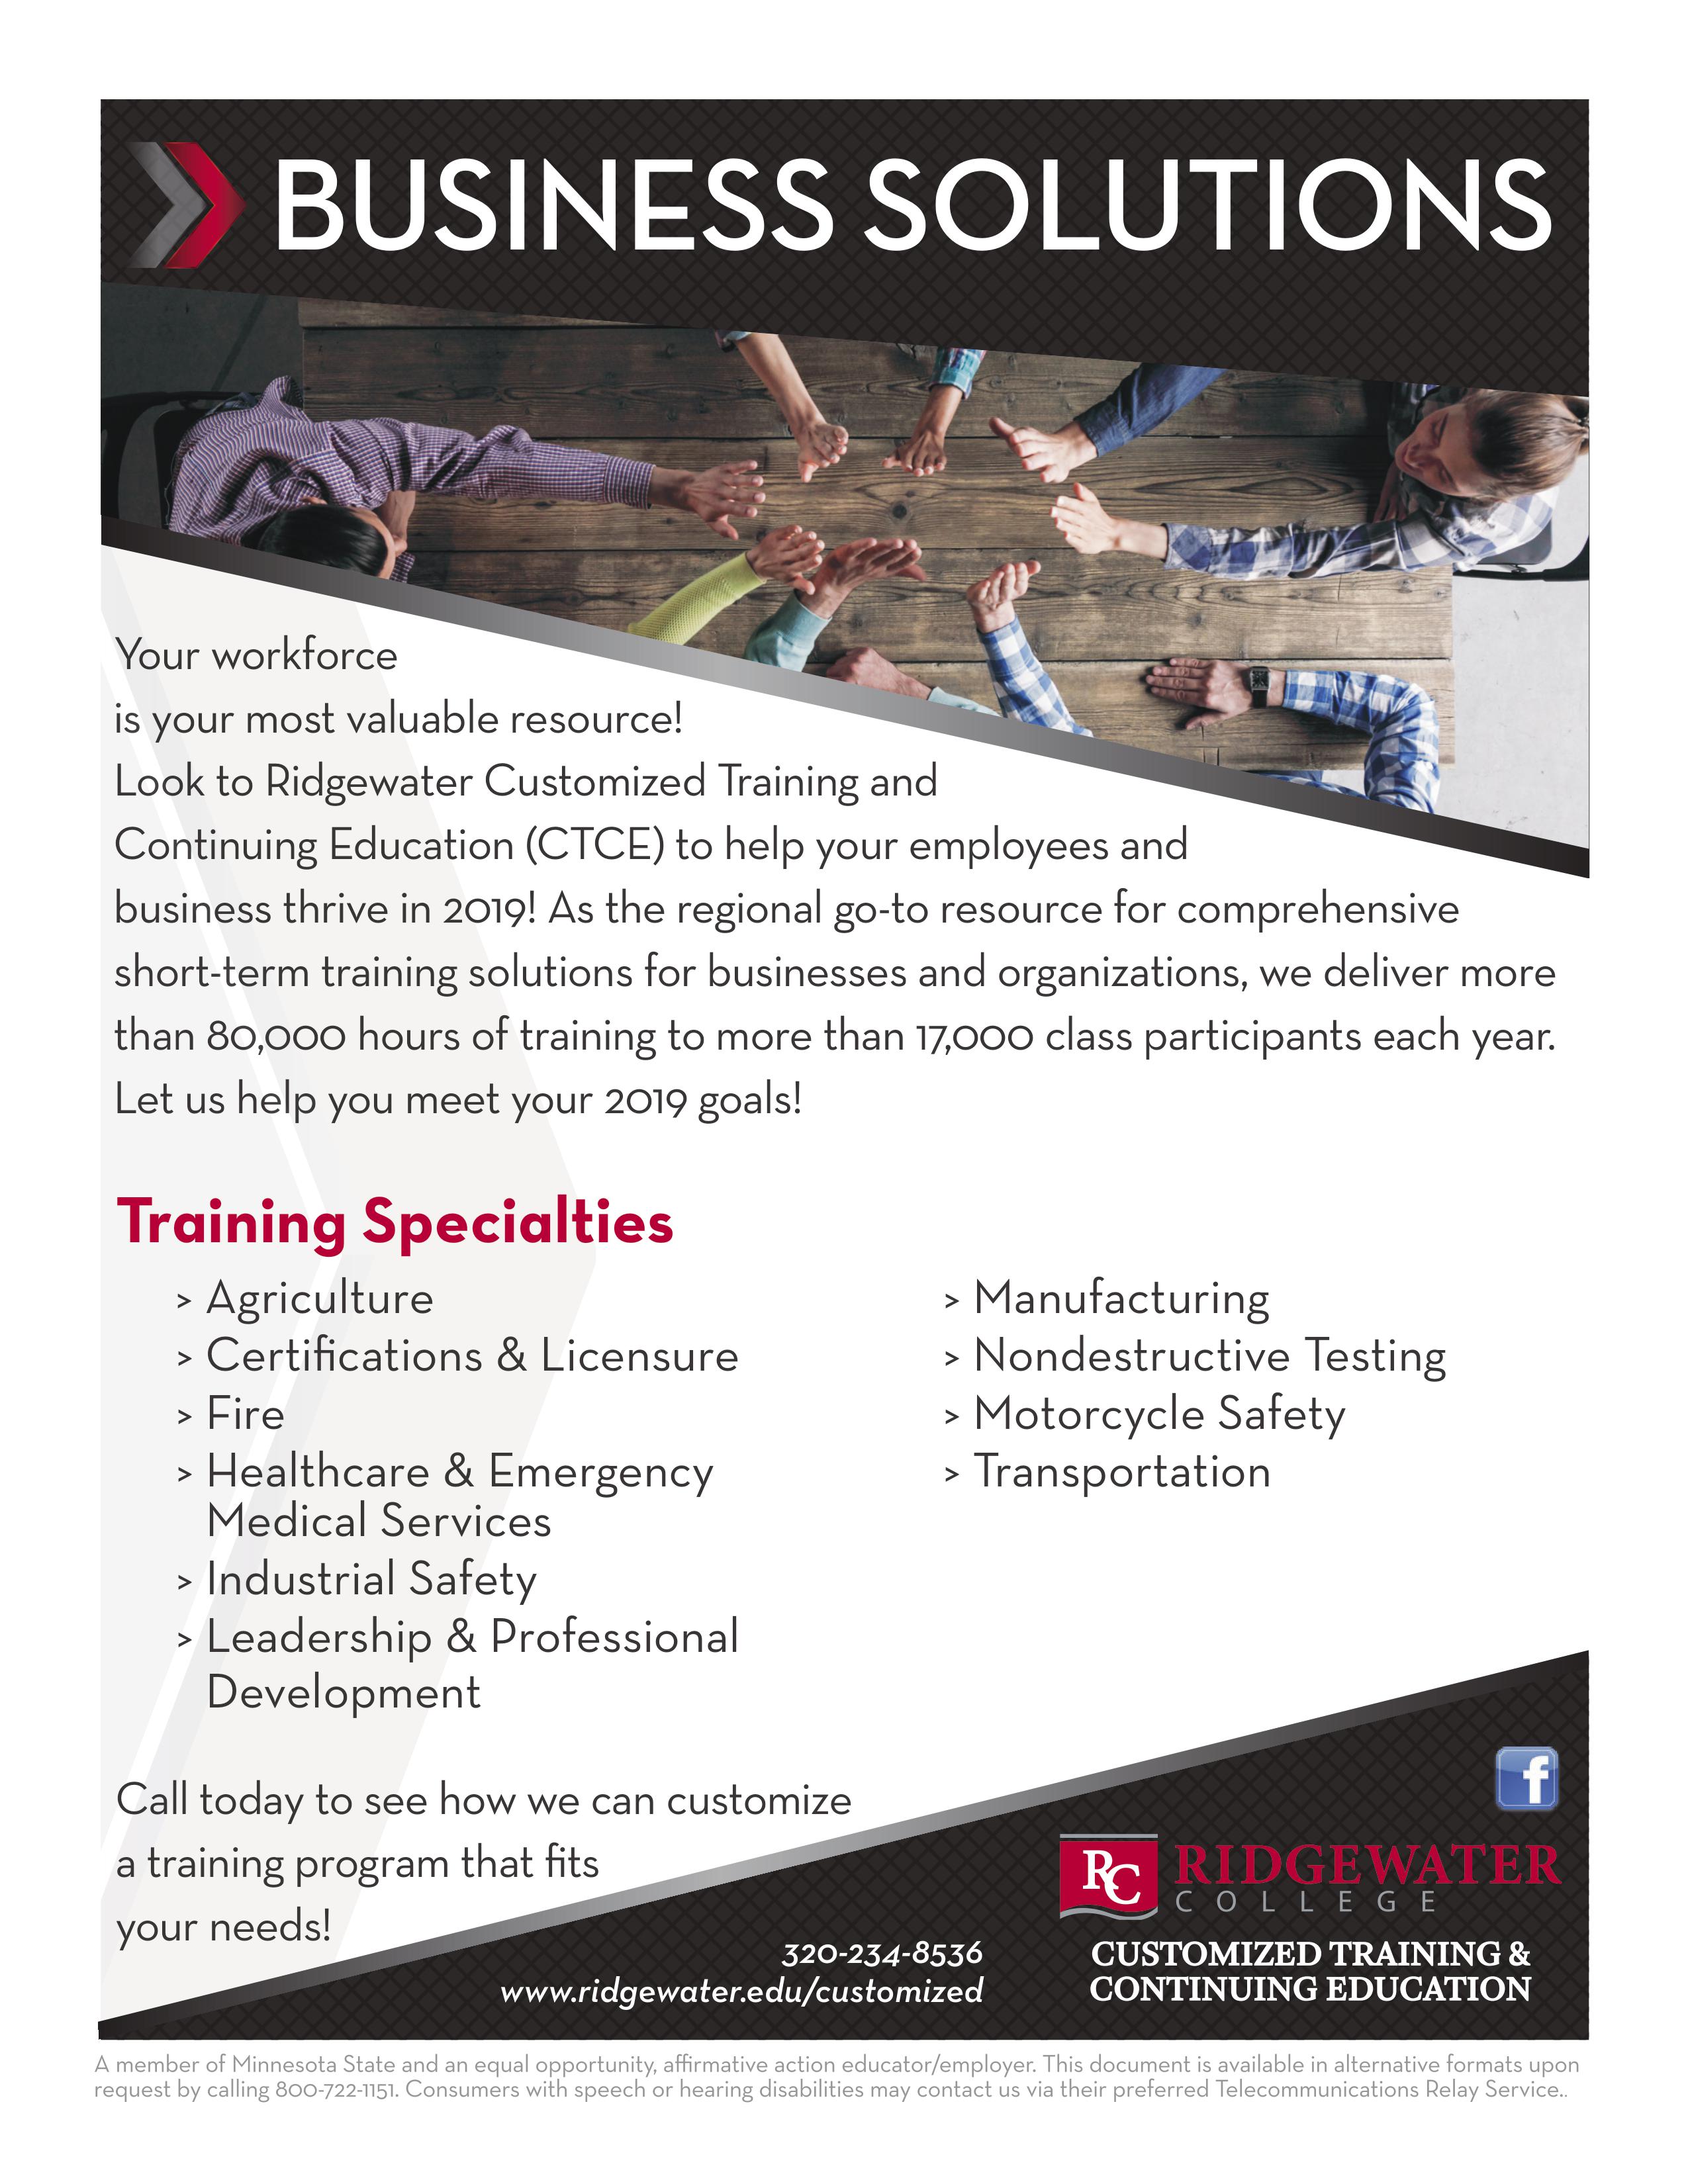 Image of a flyer for the Ridgewater Business Solutions events and offerings